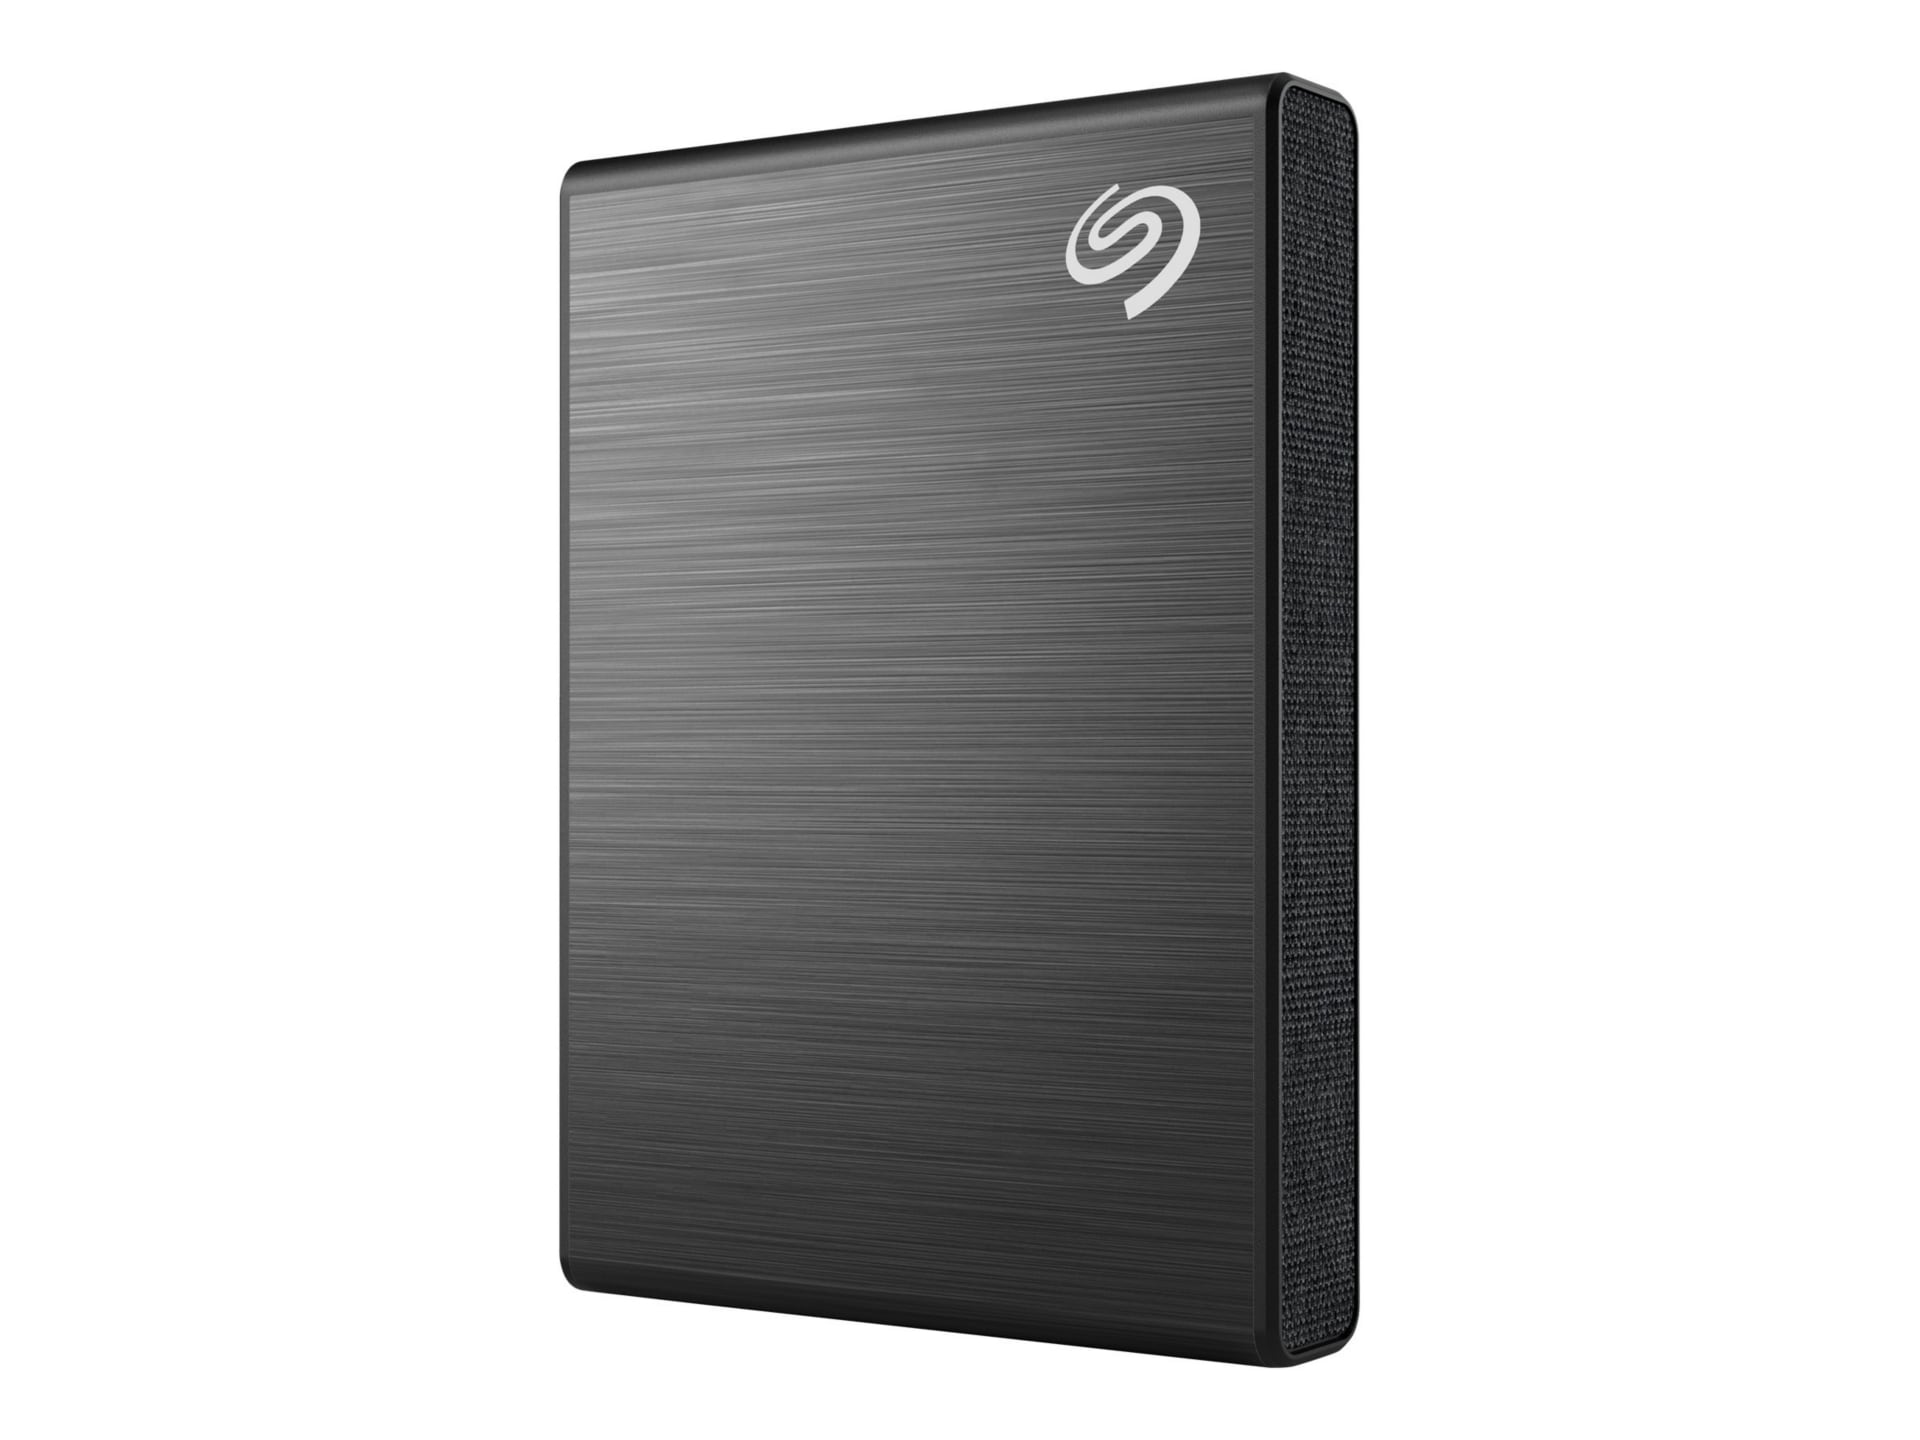 Seagate One Touch SSD STKG2000400 - SSD - 2 TB - USB 3.0